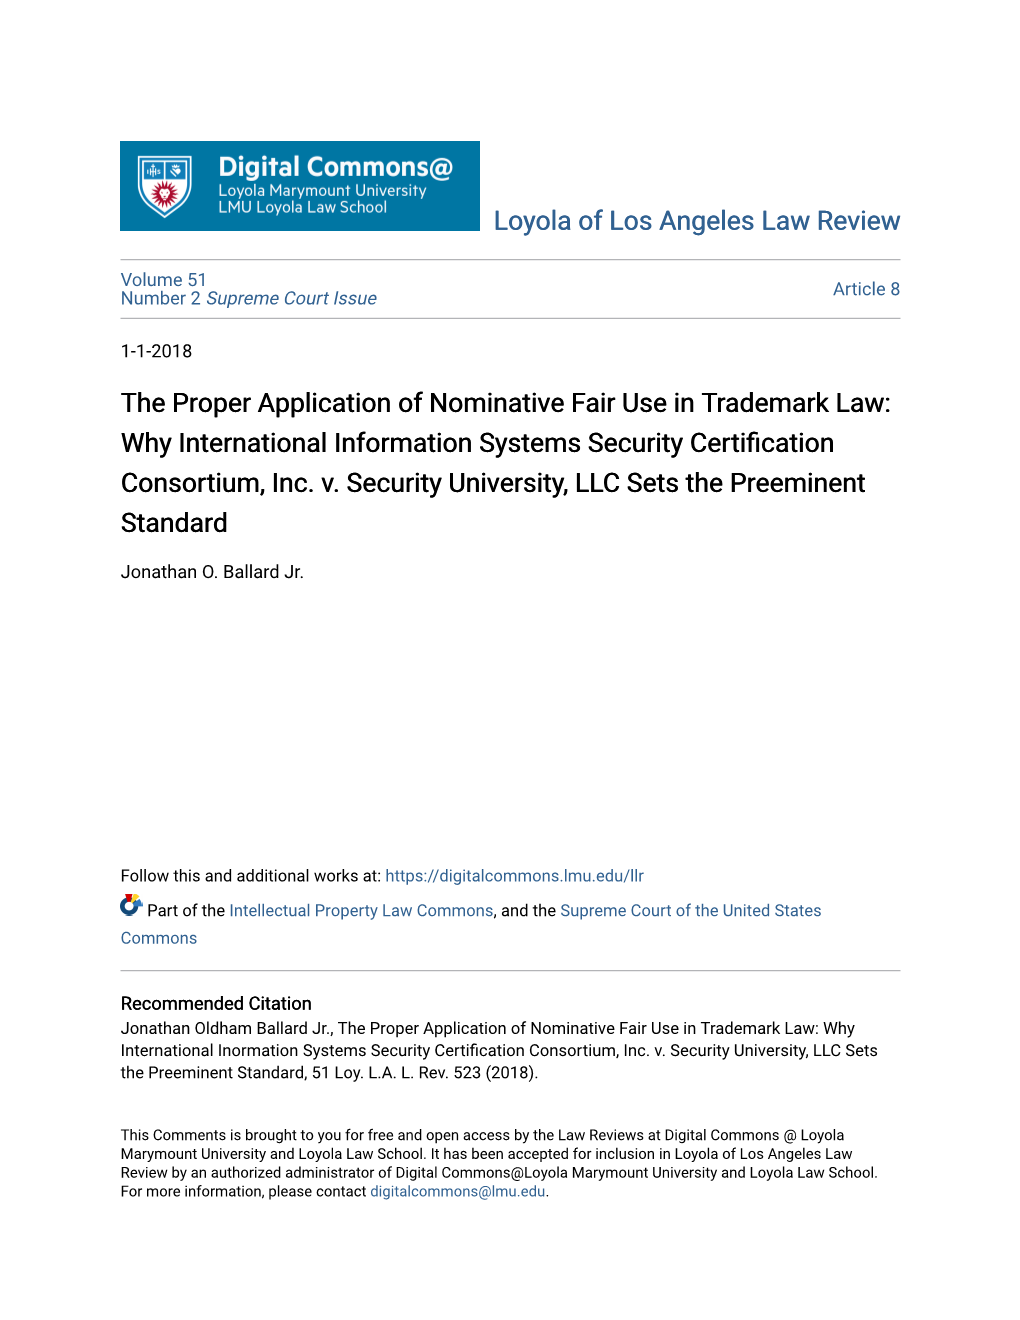 The Proper Application of Nominative Fair Use in Trademark Law: Why International Information Systems Security Certification Consortium, Inc